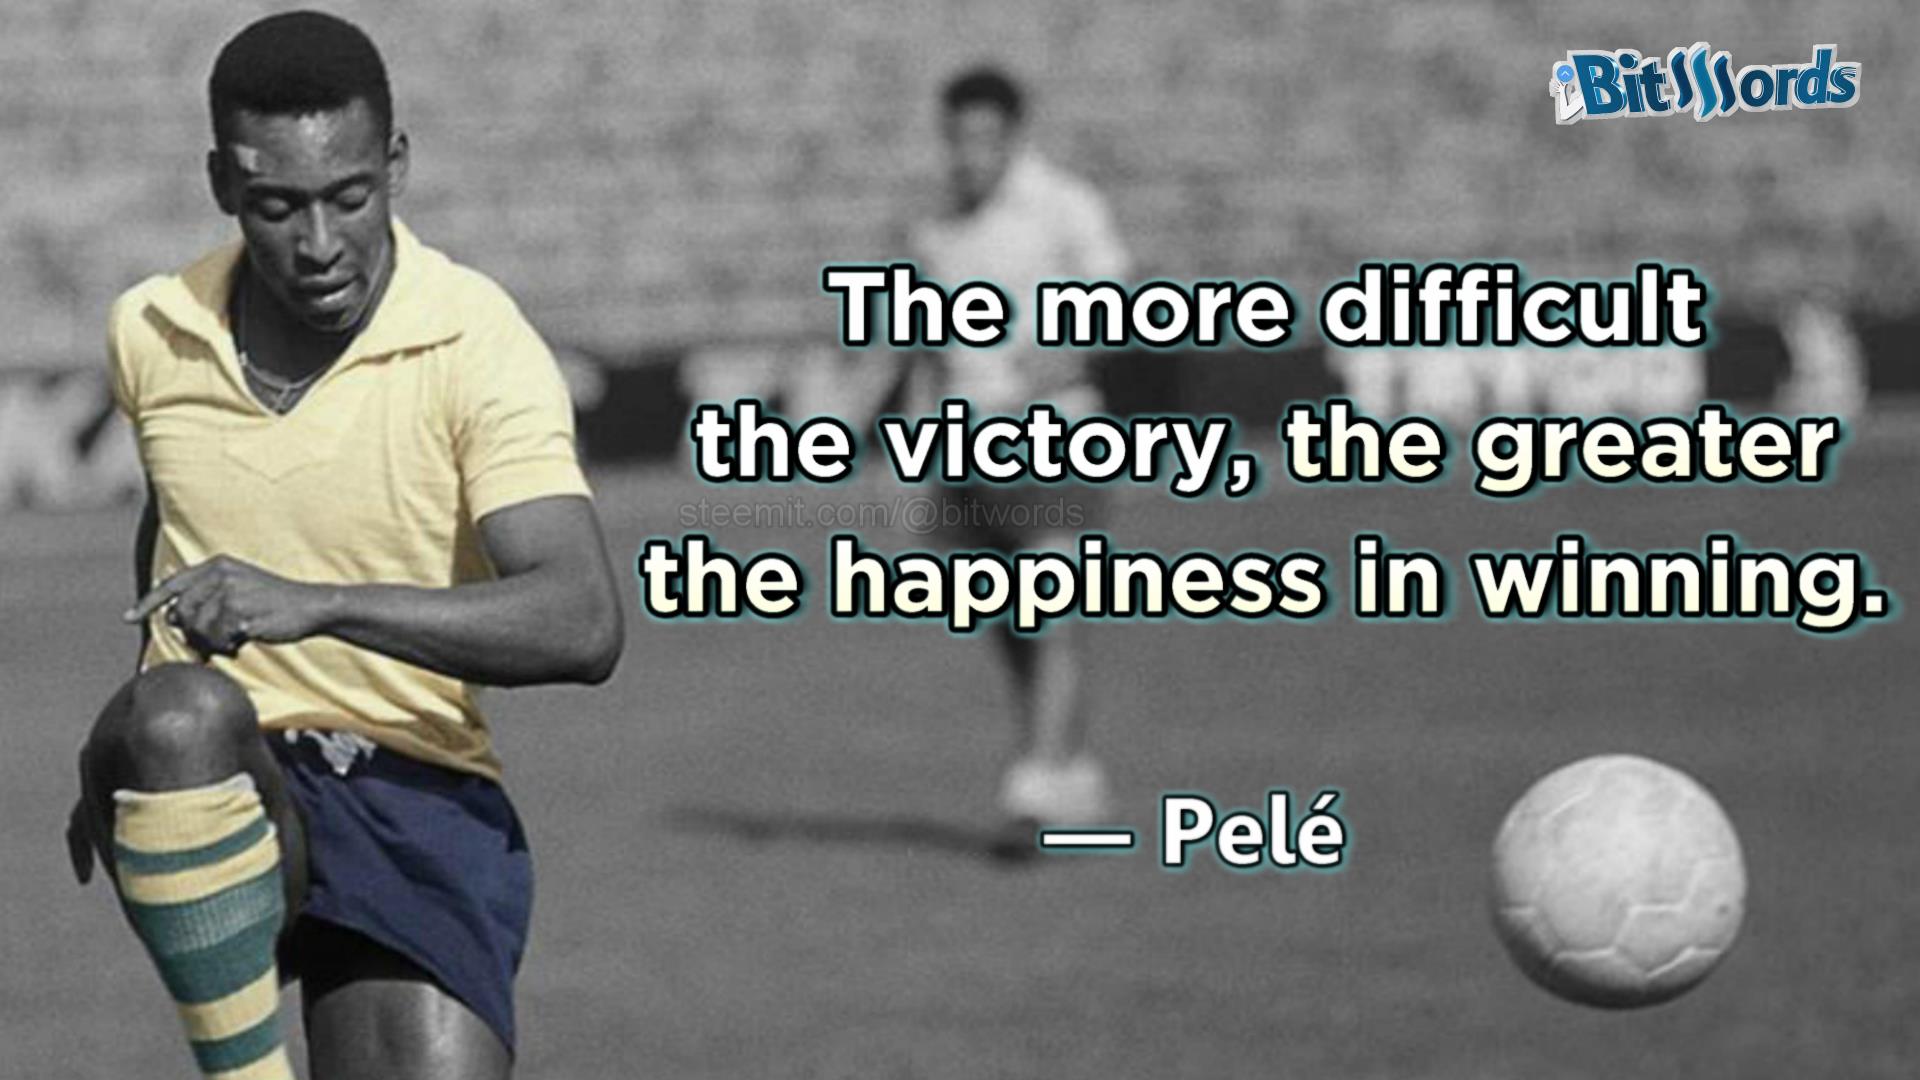 bitwords steemit sport quote of the day pele the more difficult the victory the greater the happinnes in winning.jpg